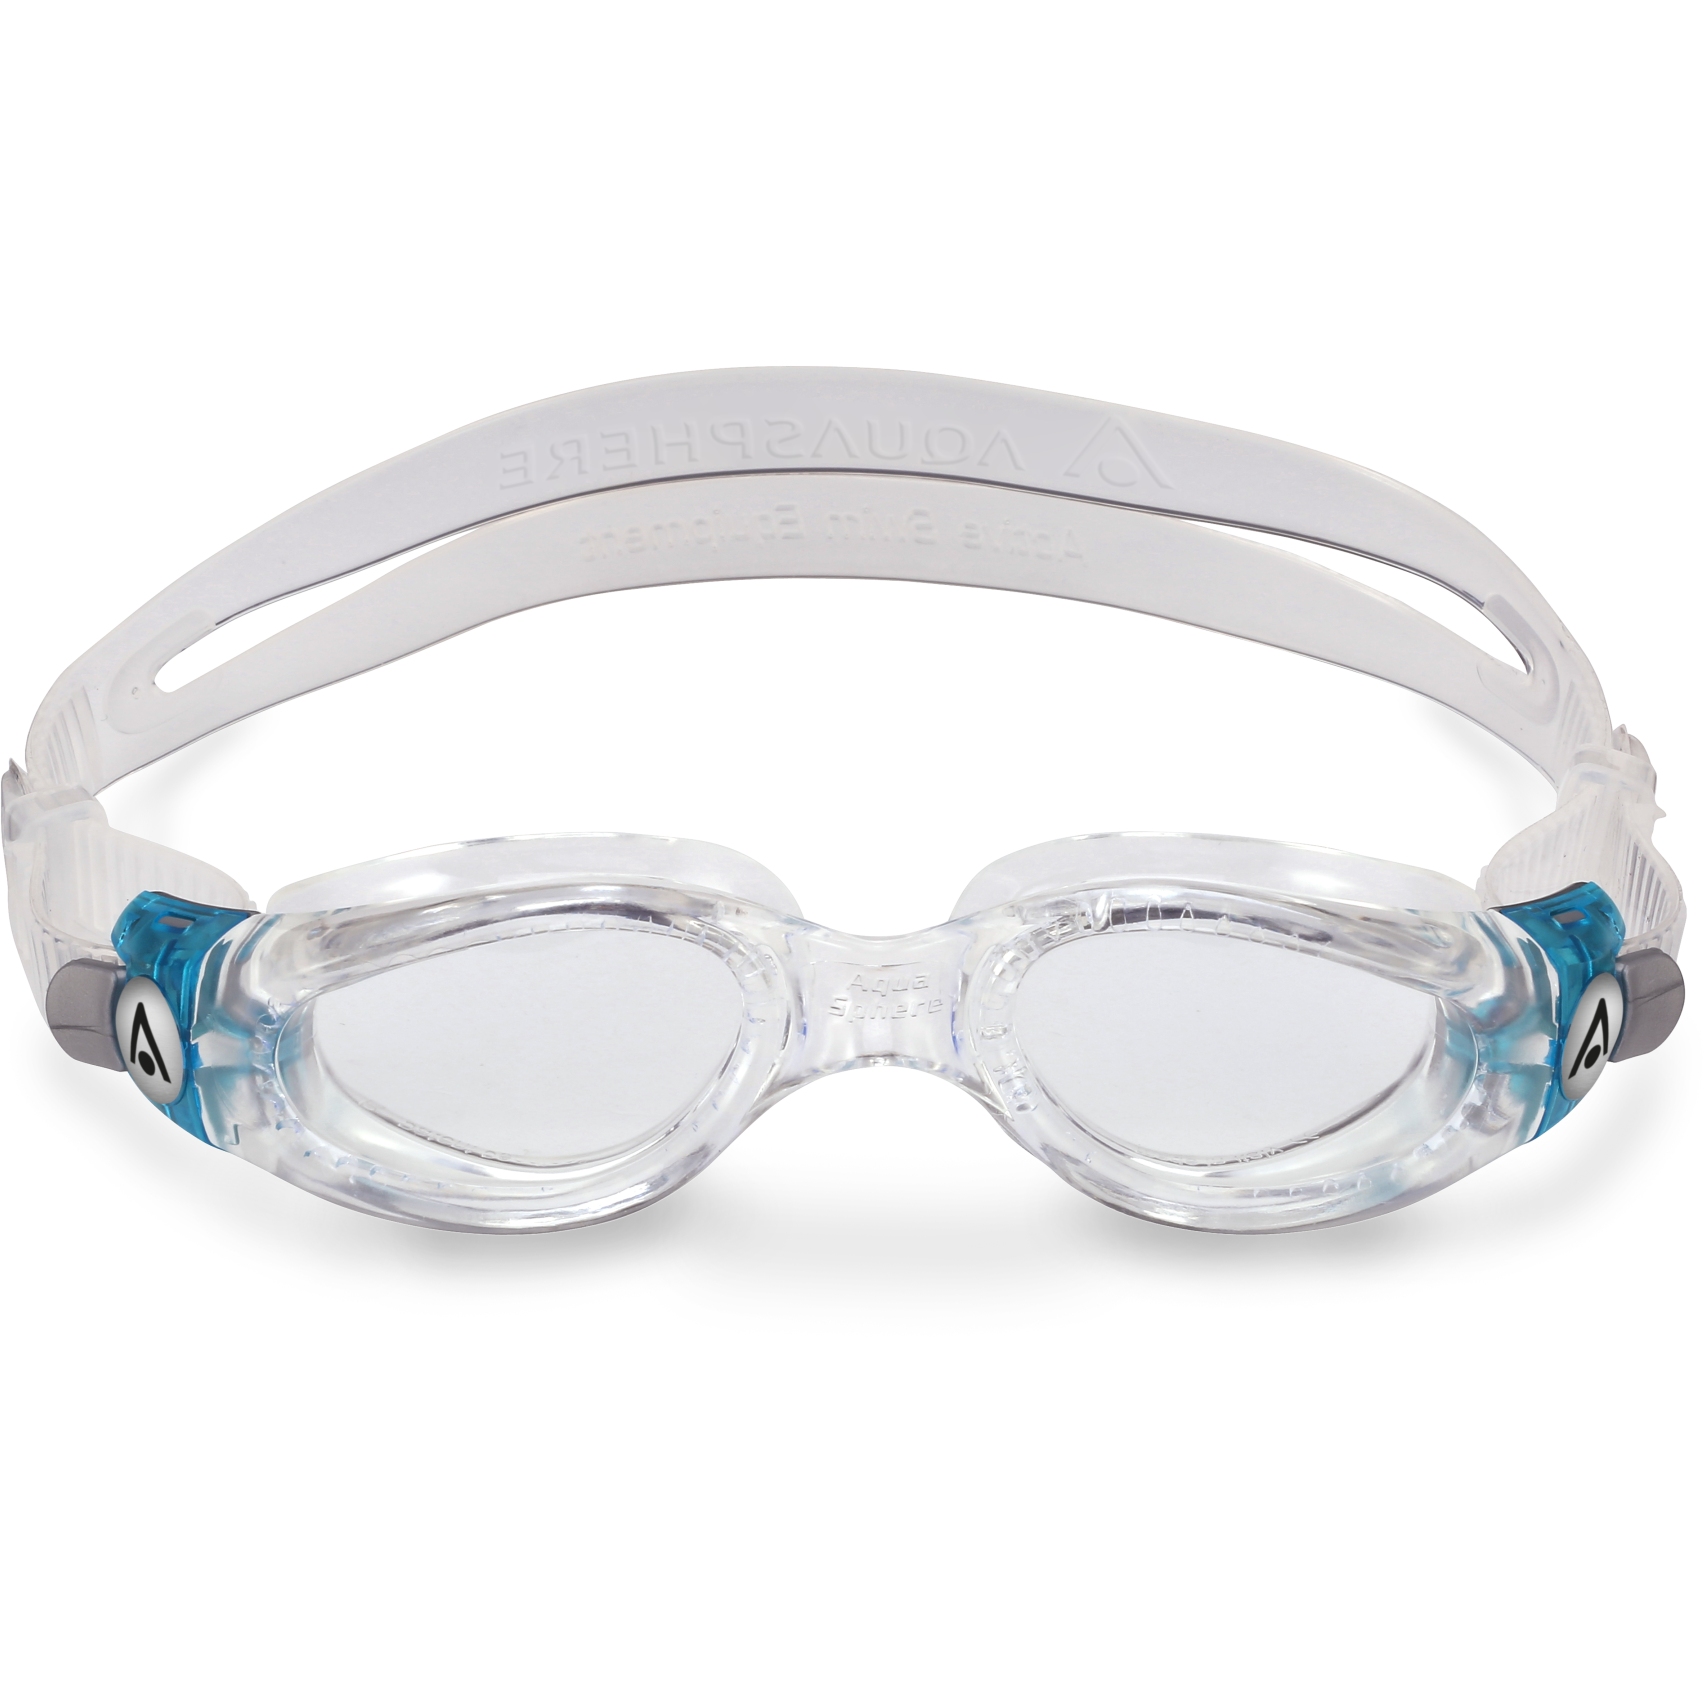 Picture of AQUASPHERE Kaiman Small Swim Goggles - Clear - Transparent/Turquoise